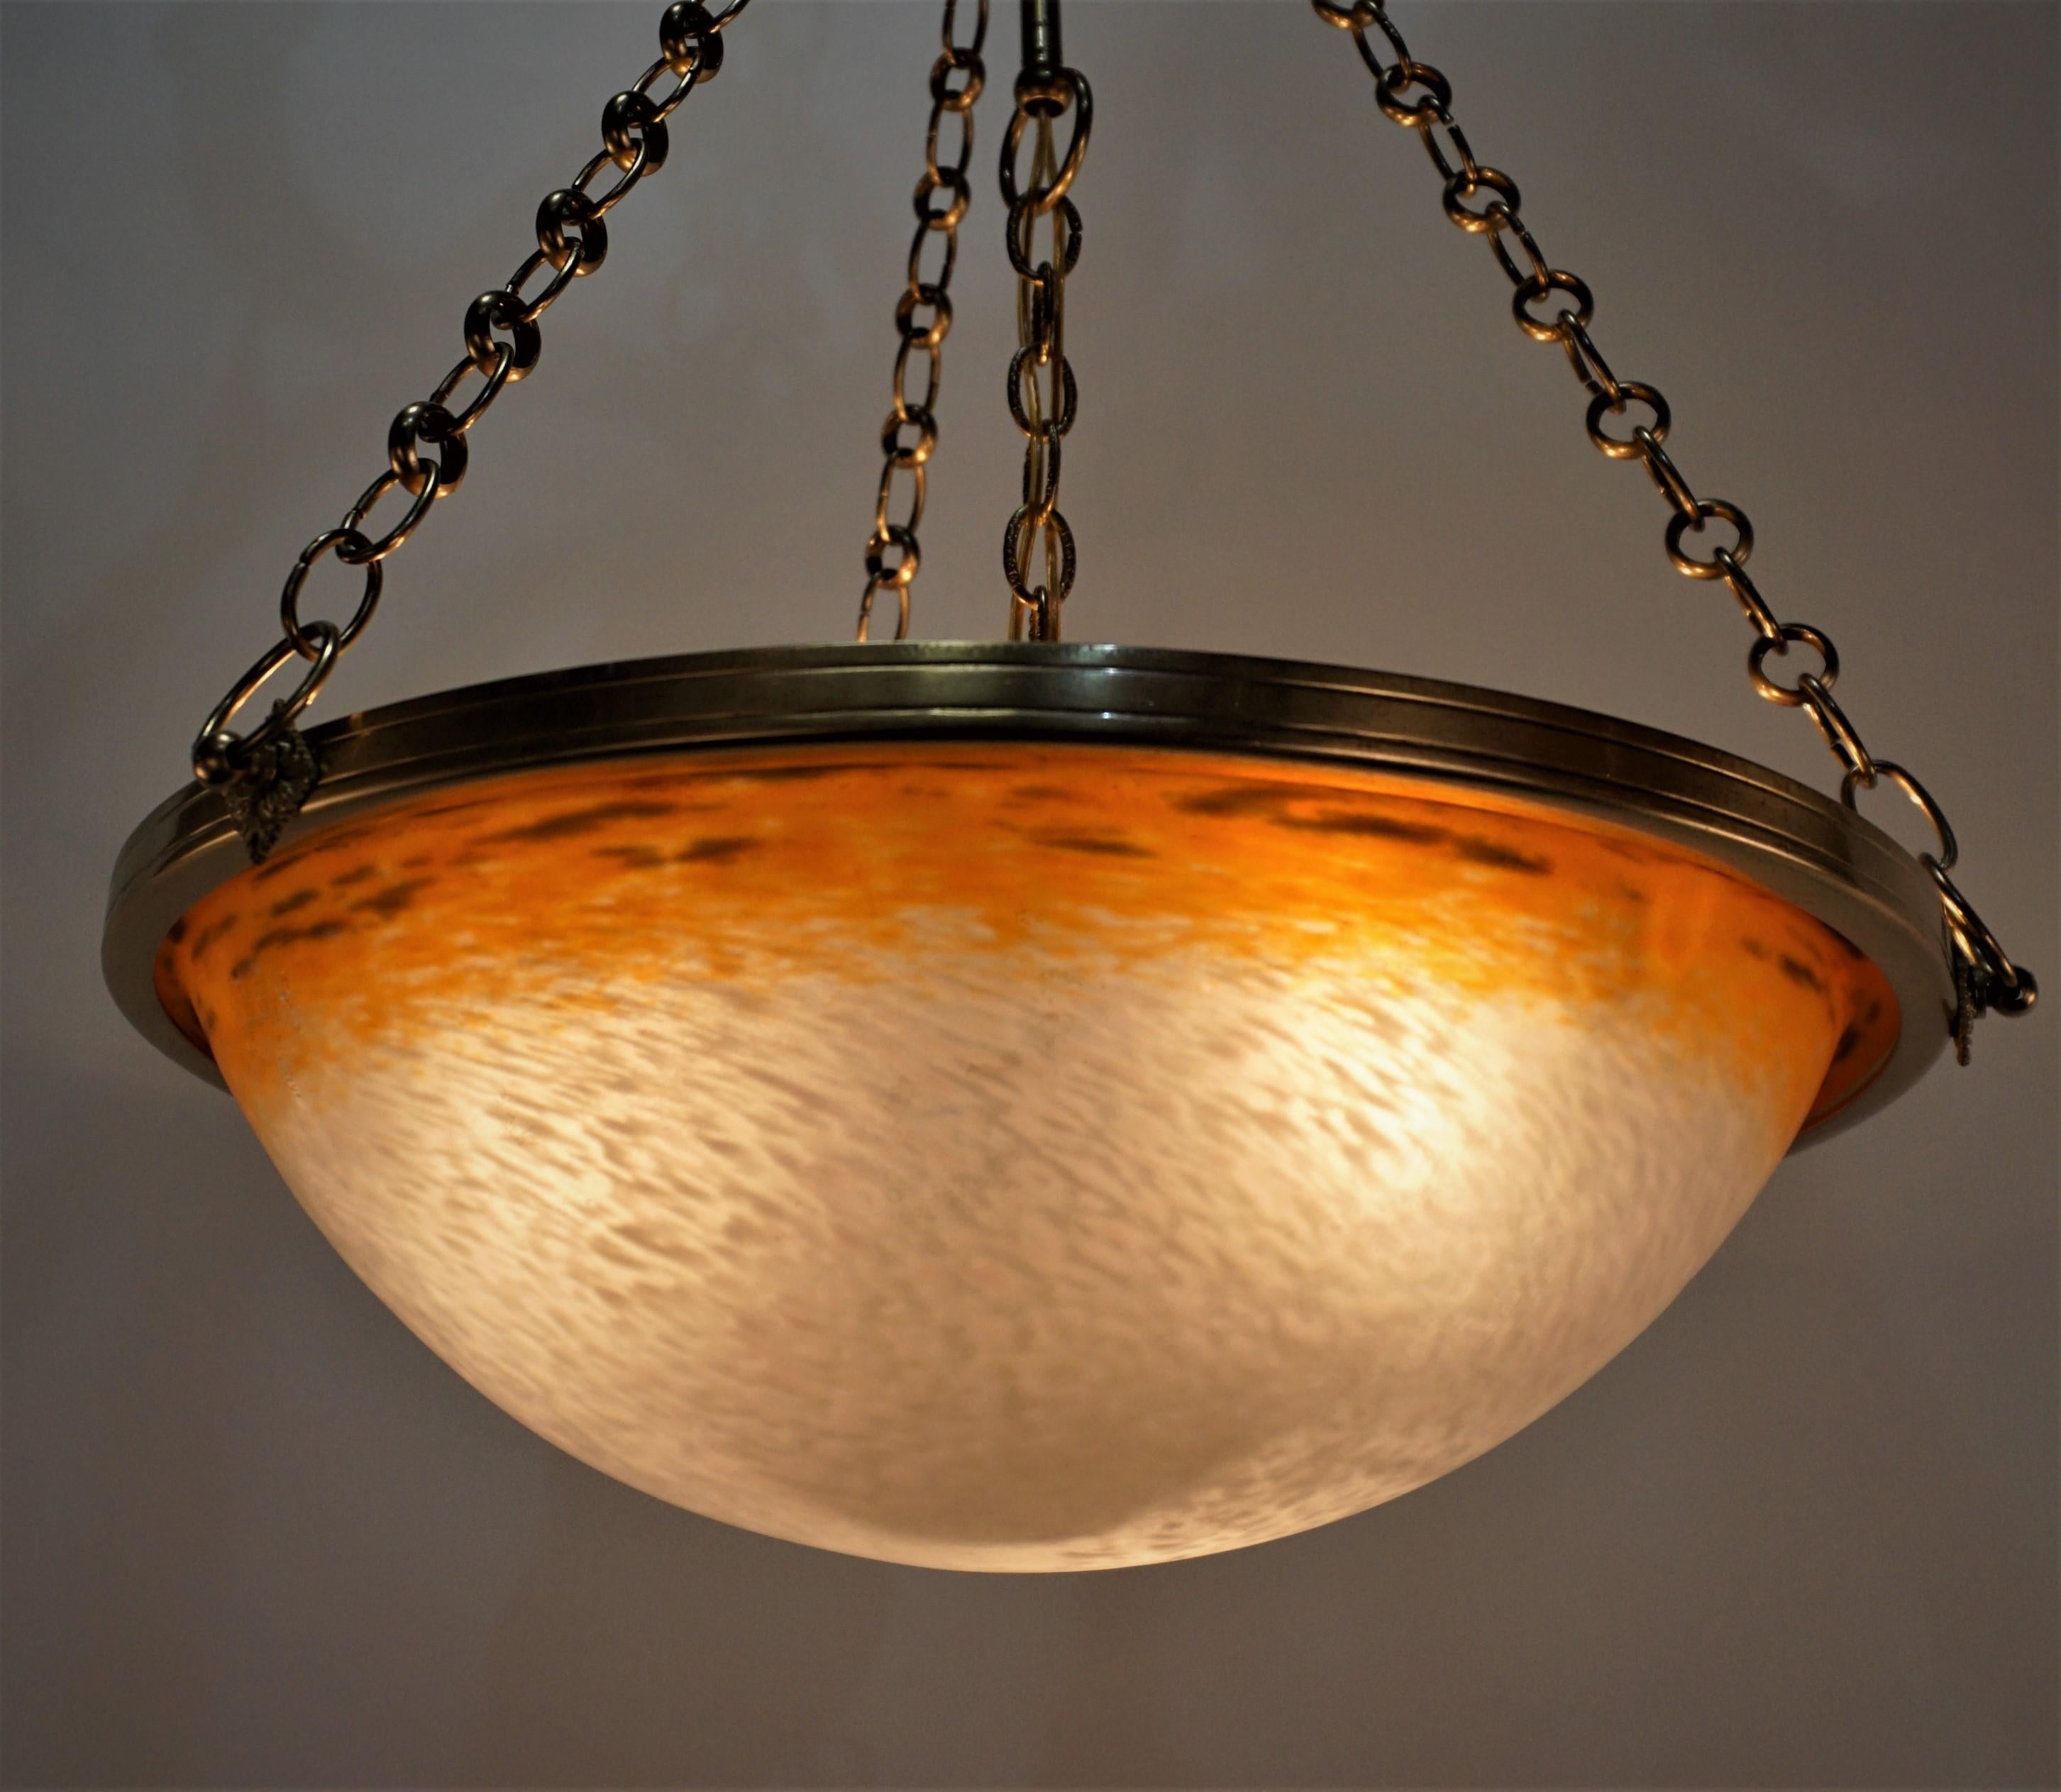 Charles Schneider blown glass in orange and textured clear/white with bronze hardware.
Professionally rewired and ready for installation.
Three lights max 100 each.